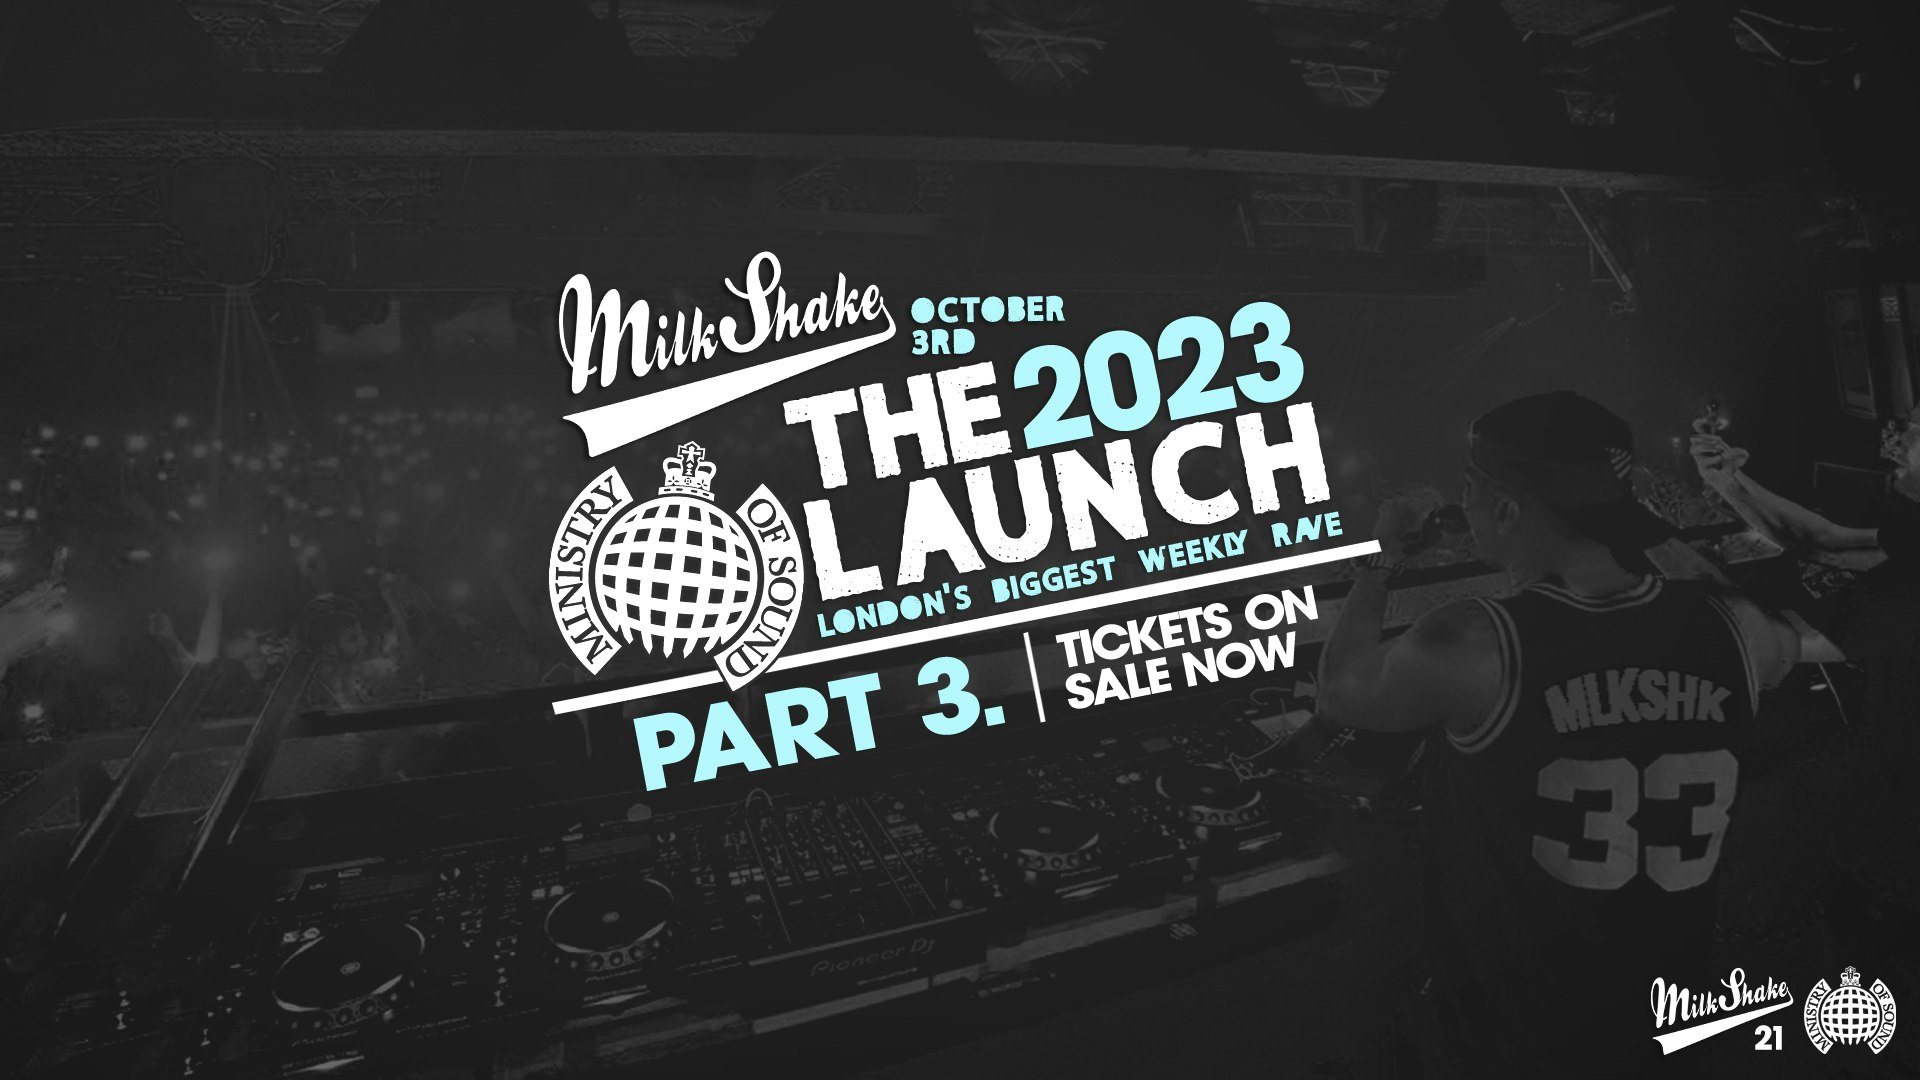 ⚠️ ﻿SOLD OUT ⚠️ Ministry of Sound, Milkshake – Official London Freshers Launch 2023 🌍 PART 3  👀  ⚠️ ﻿SOLD OUT ⚠️